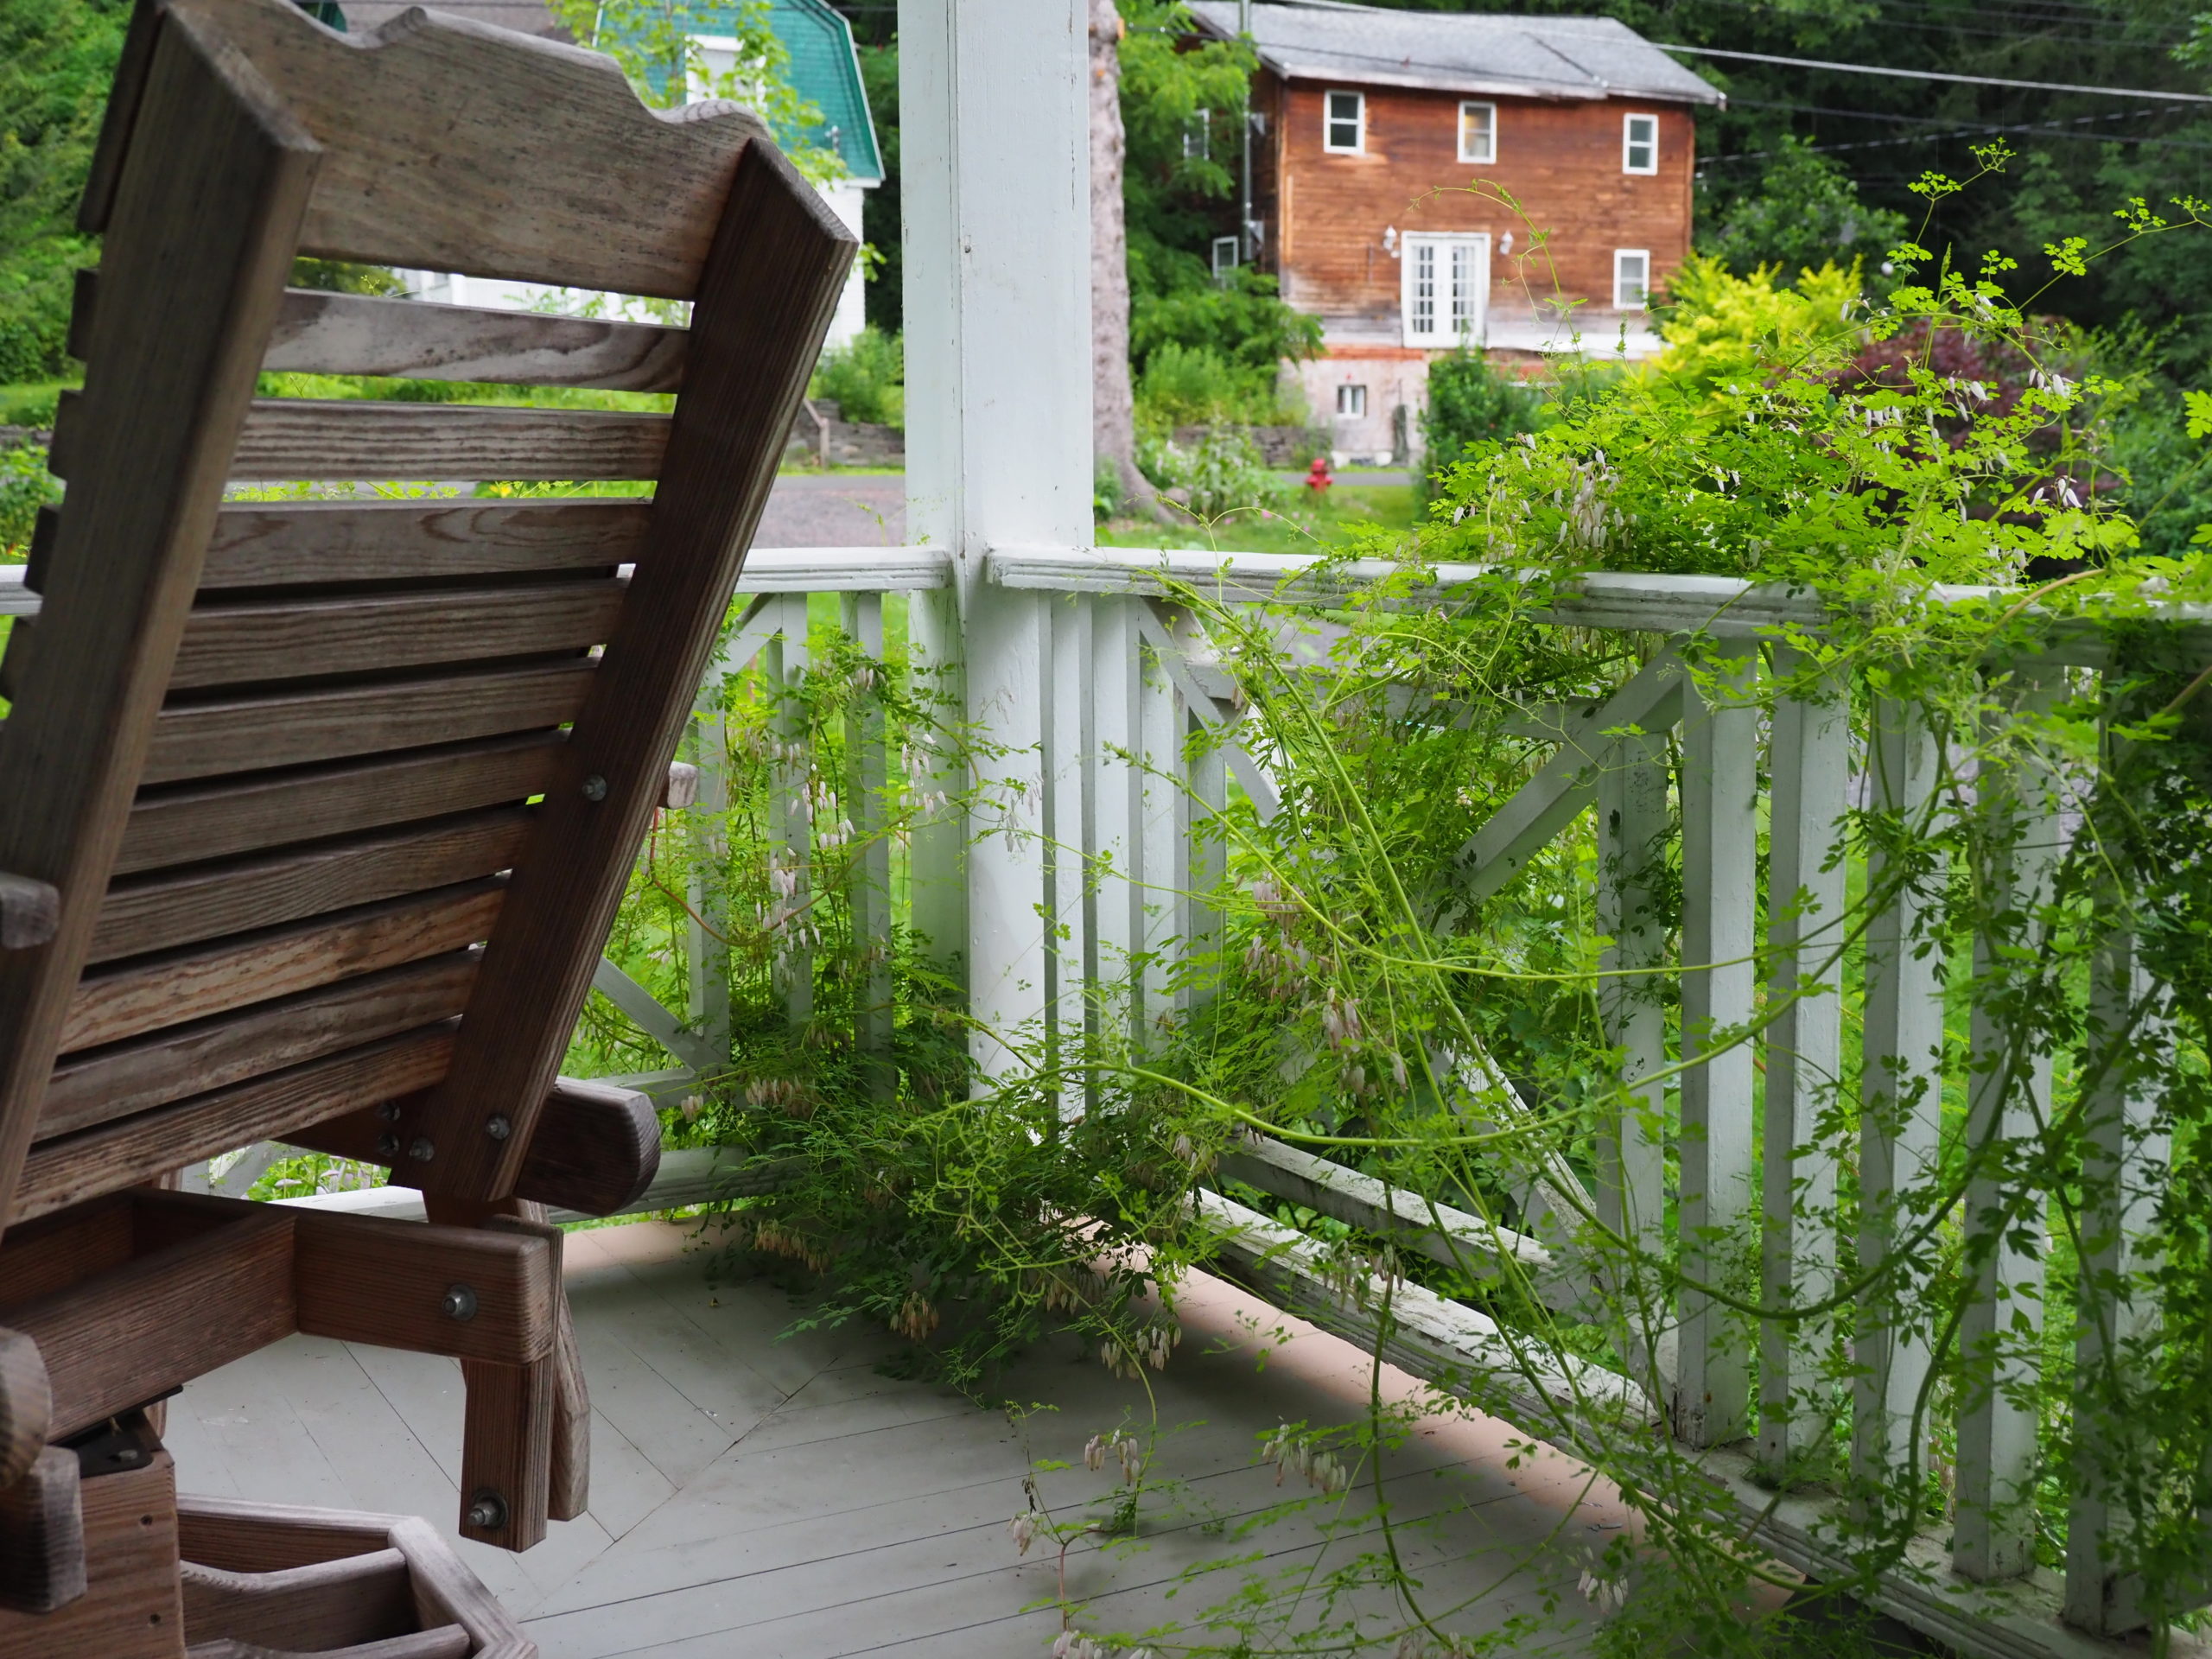 This summer I kept Adlumia trained along the porch railing though we were in constant conflict and it really wanted to sit in my chair.  ANDREW MESSINGER